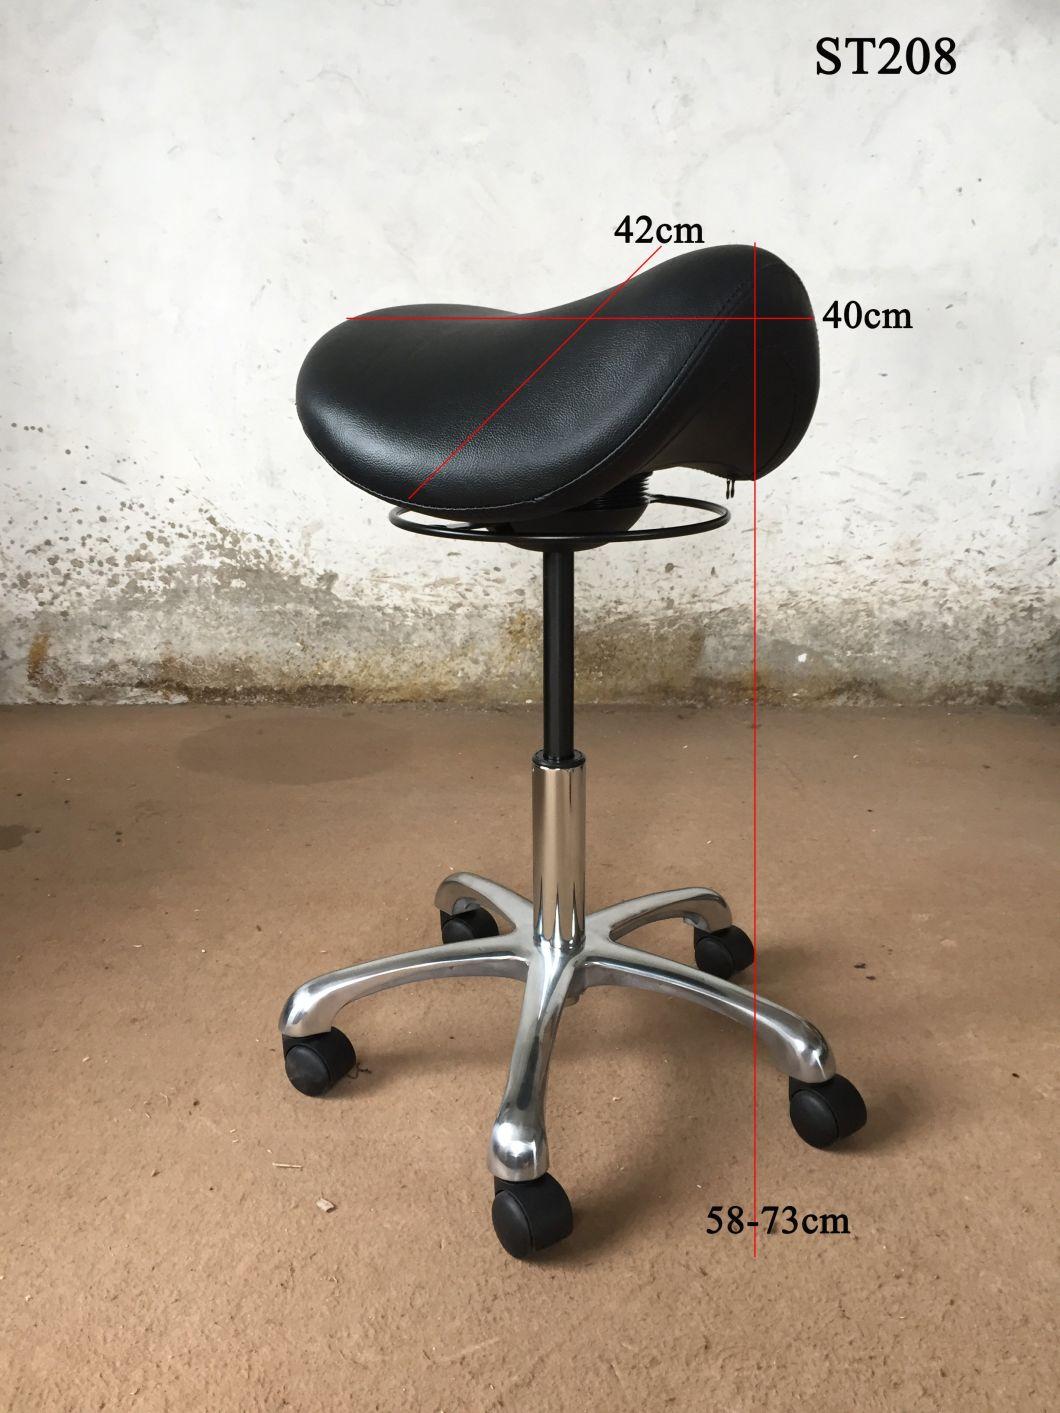 Black Color PU Leather All Degree Swing Funcion Frame Saddle Seat Industrial Chair